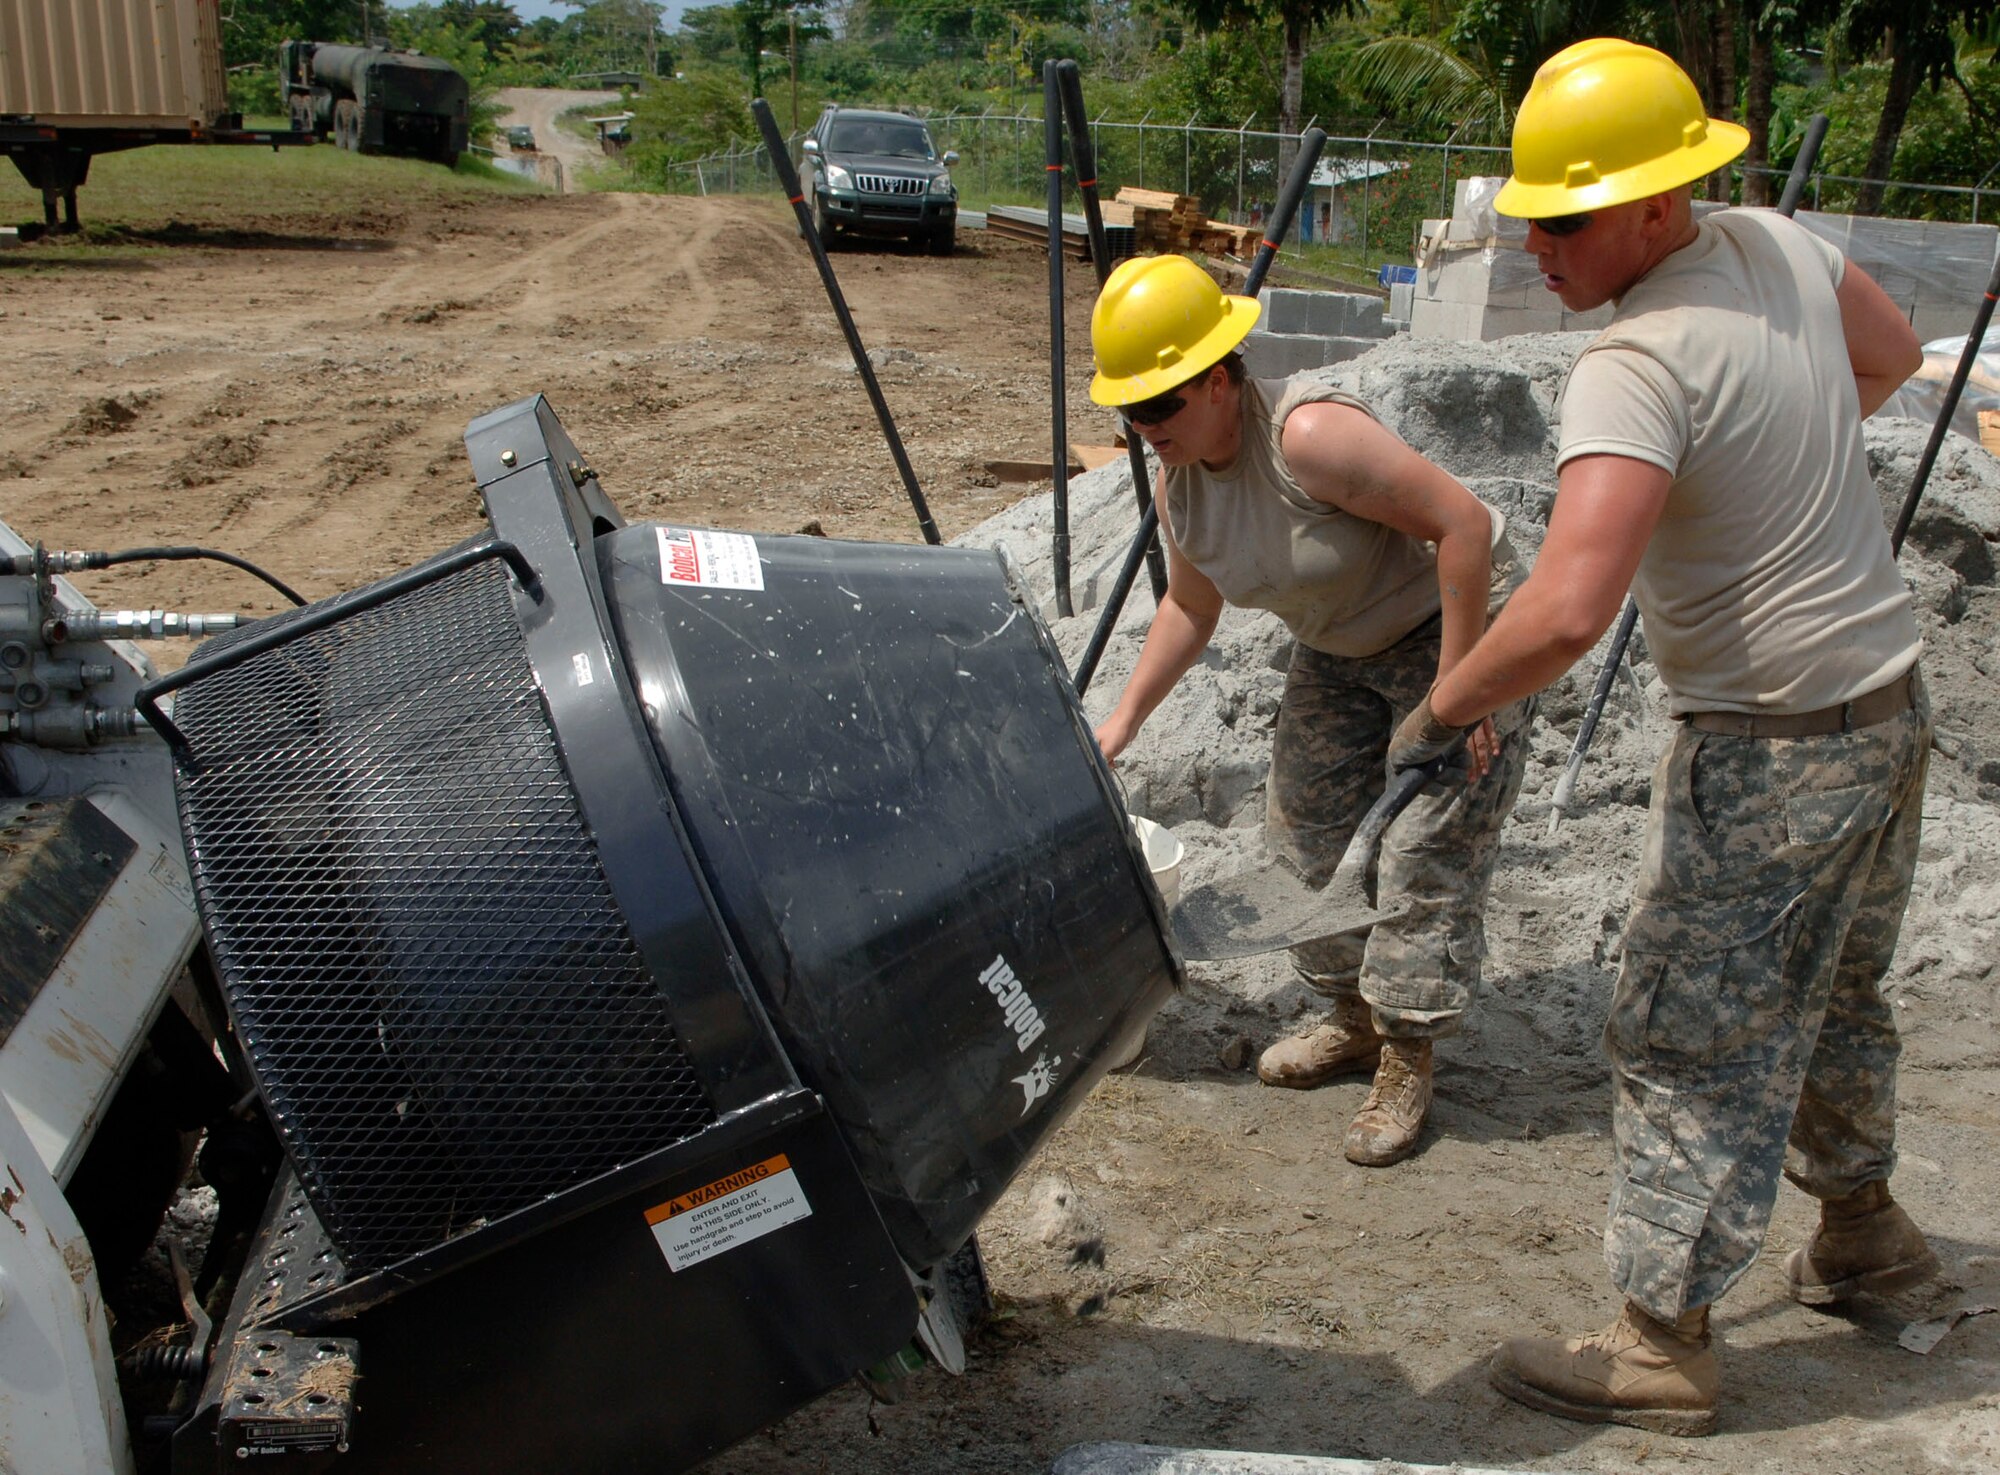 Spc. Jennifer Bartlein (left) and Pfc. Wayne Paliwoda, construction engineers with the 372nd Engineer Company, mix concrete June 26 at Santa Librada elementary school in Panama. The Army Reservists are deployed in support of New Horizons Panama 2010, a humanitarian assistance mission designed to strengthen partnerships between the United States and Panama. (U.S. Air Force photo/Tech. Sgt. Eric Petosky)